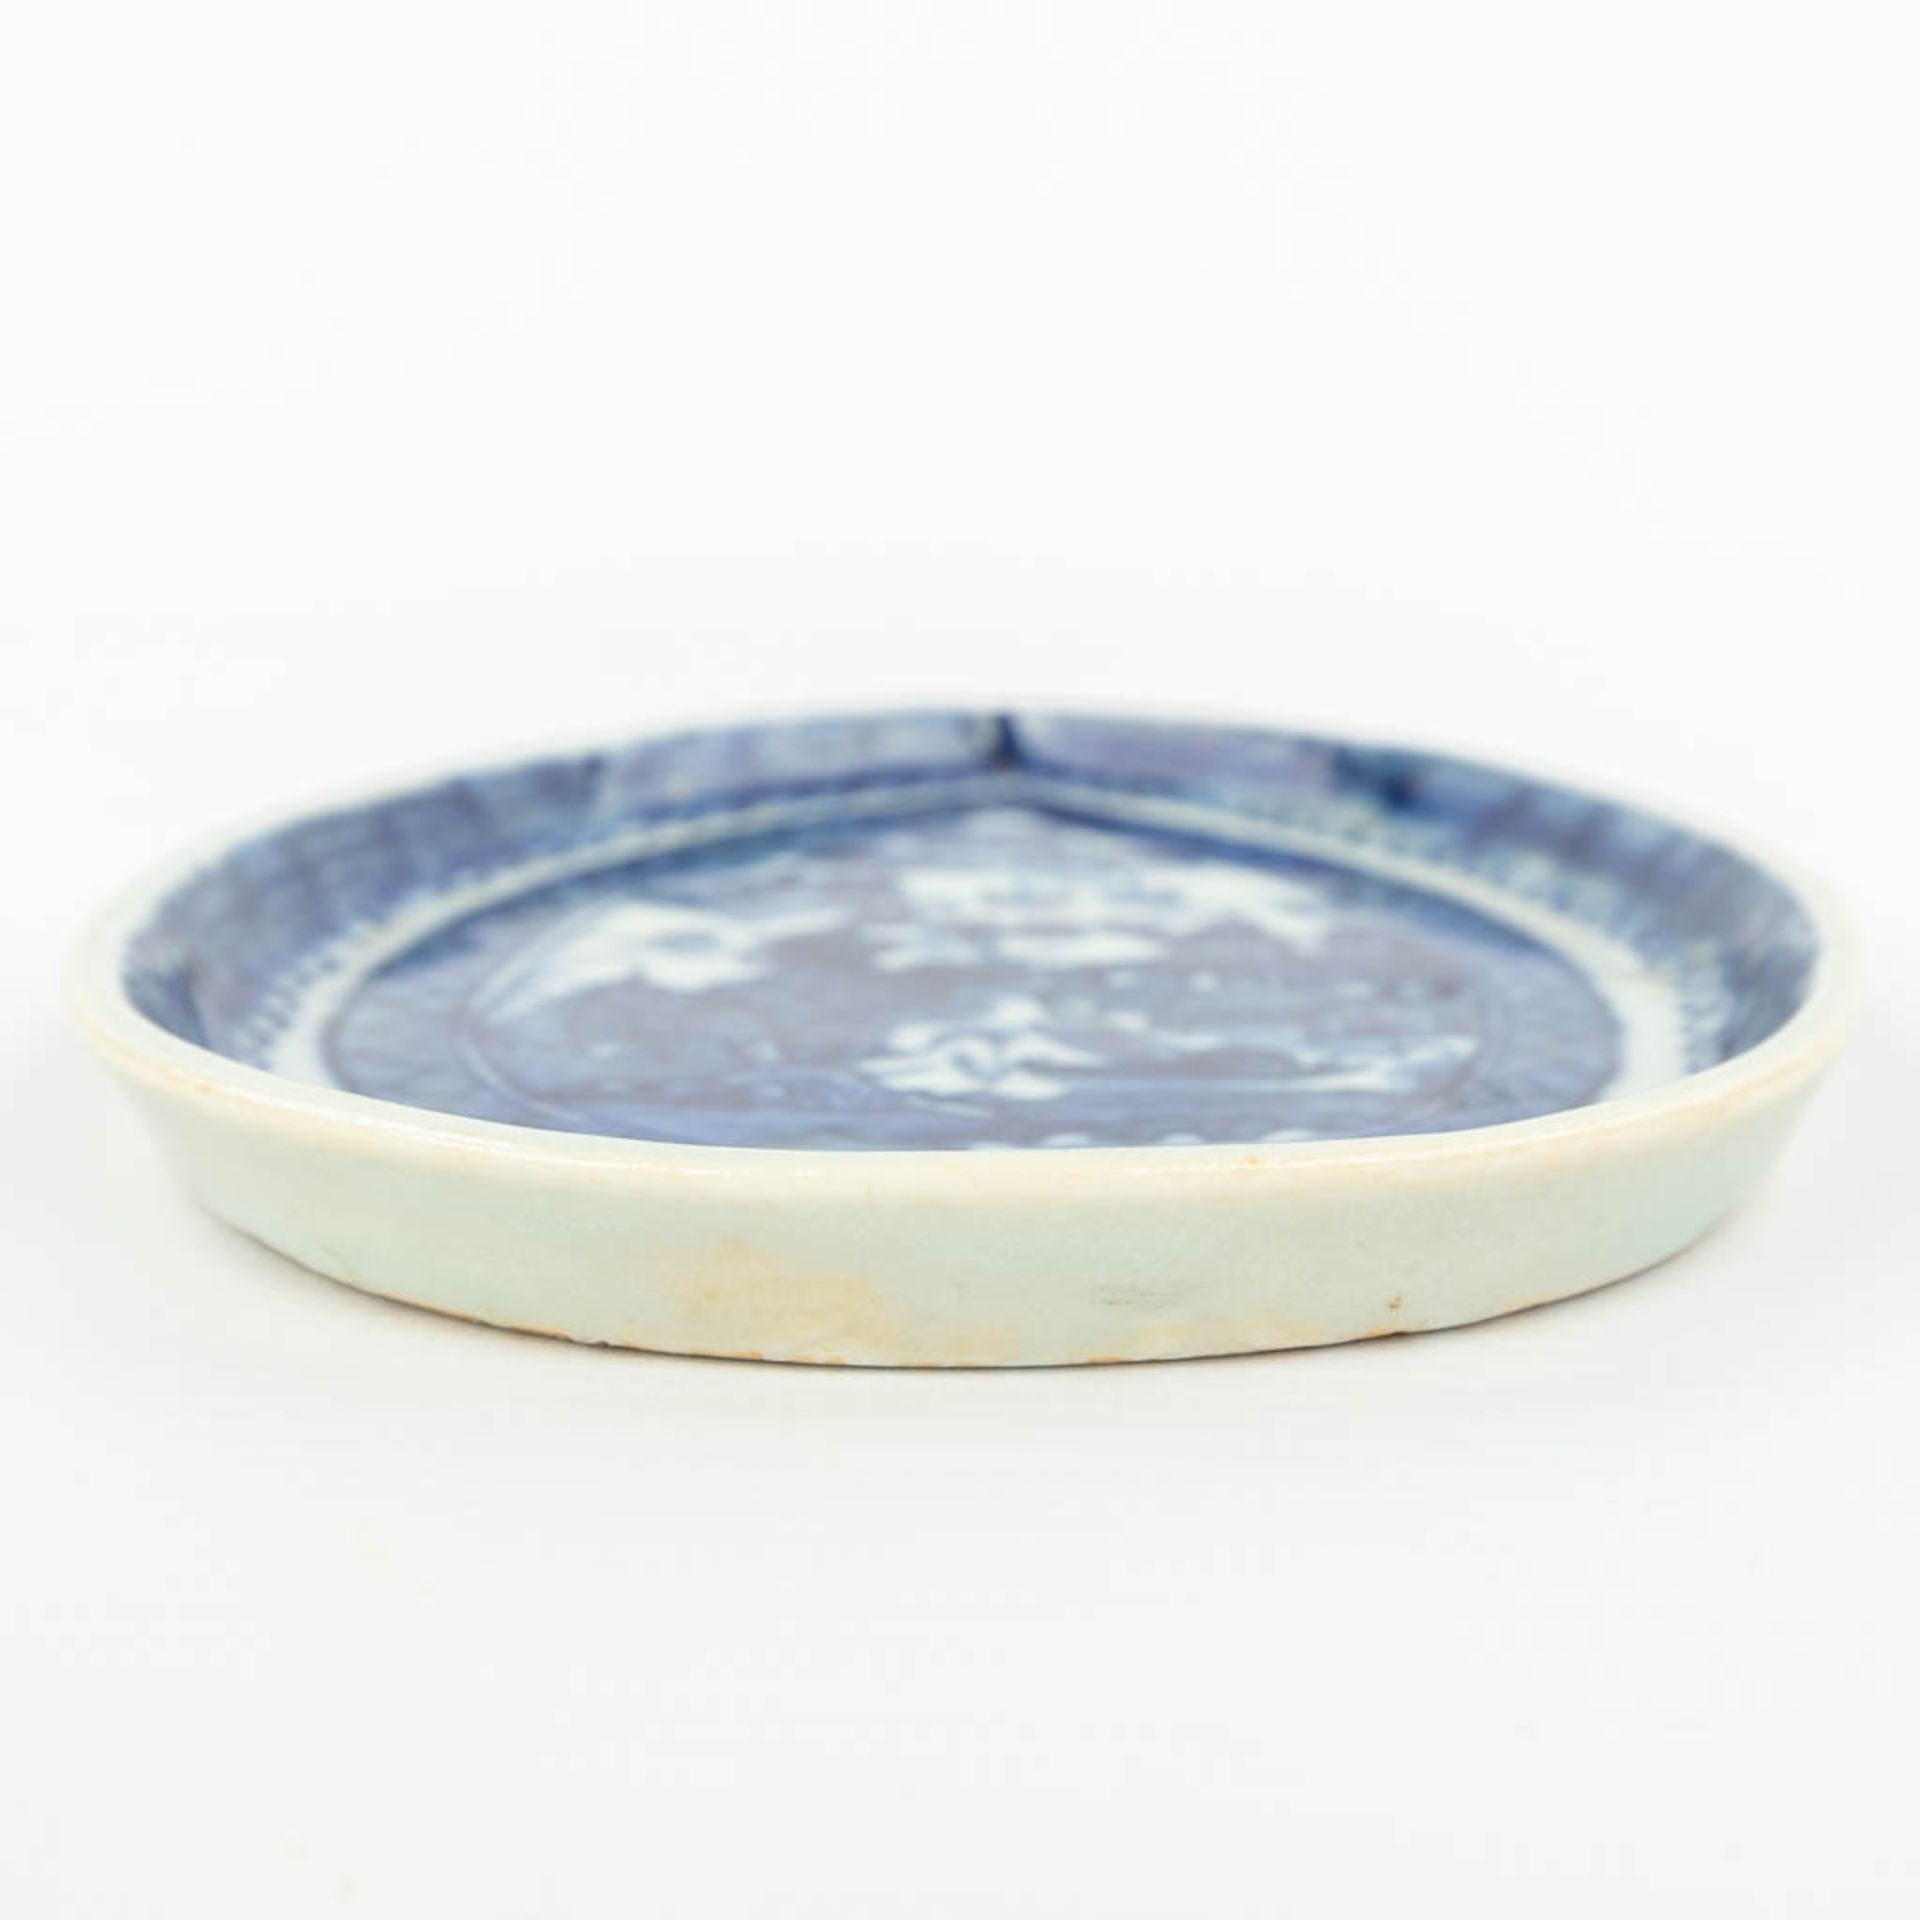 A Chinese dish made of porcelain with a blue-white landscape decor. - Image 7 of 10